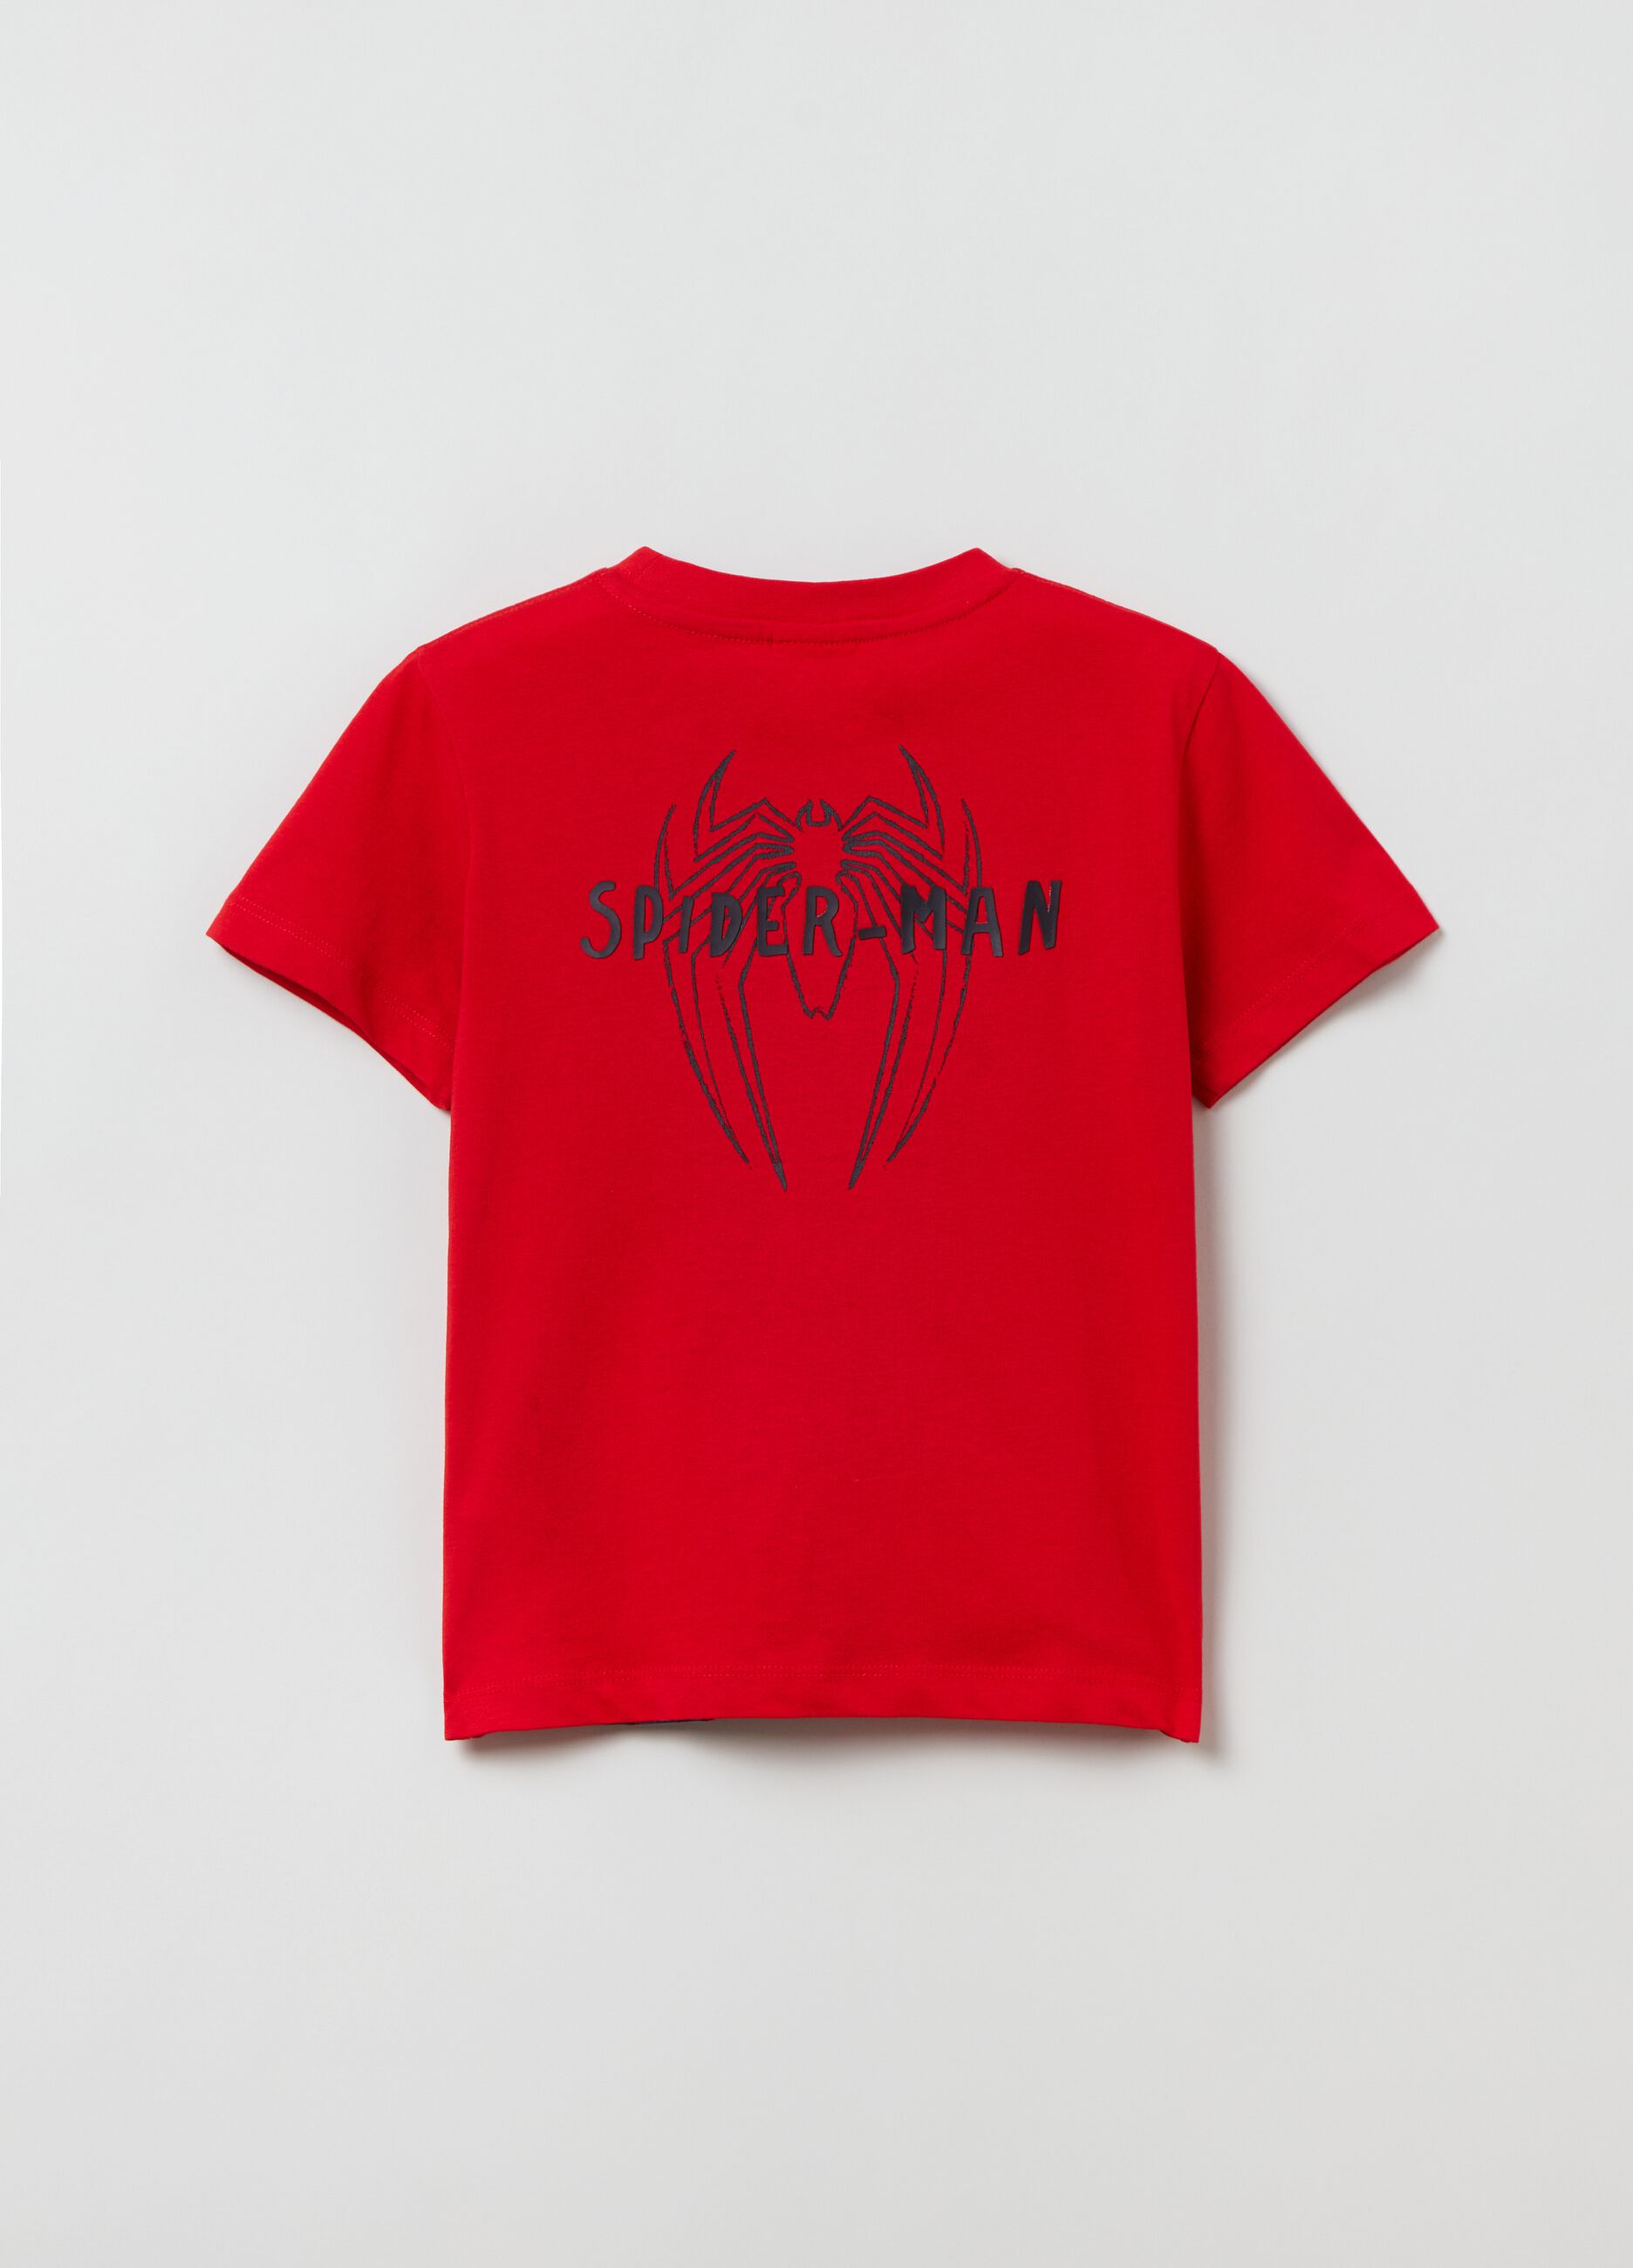 Marvel Spiderman T-shirt with print